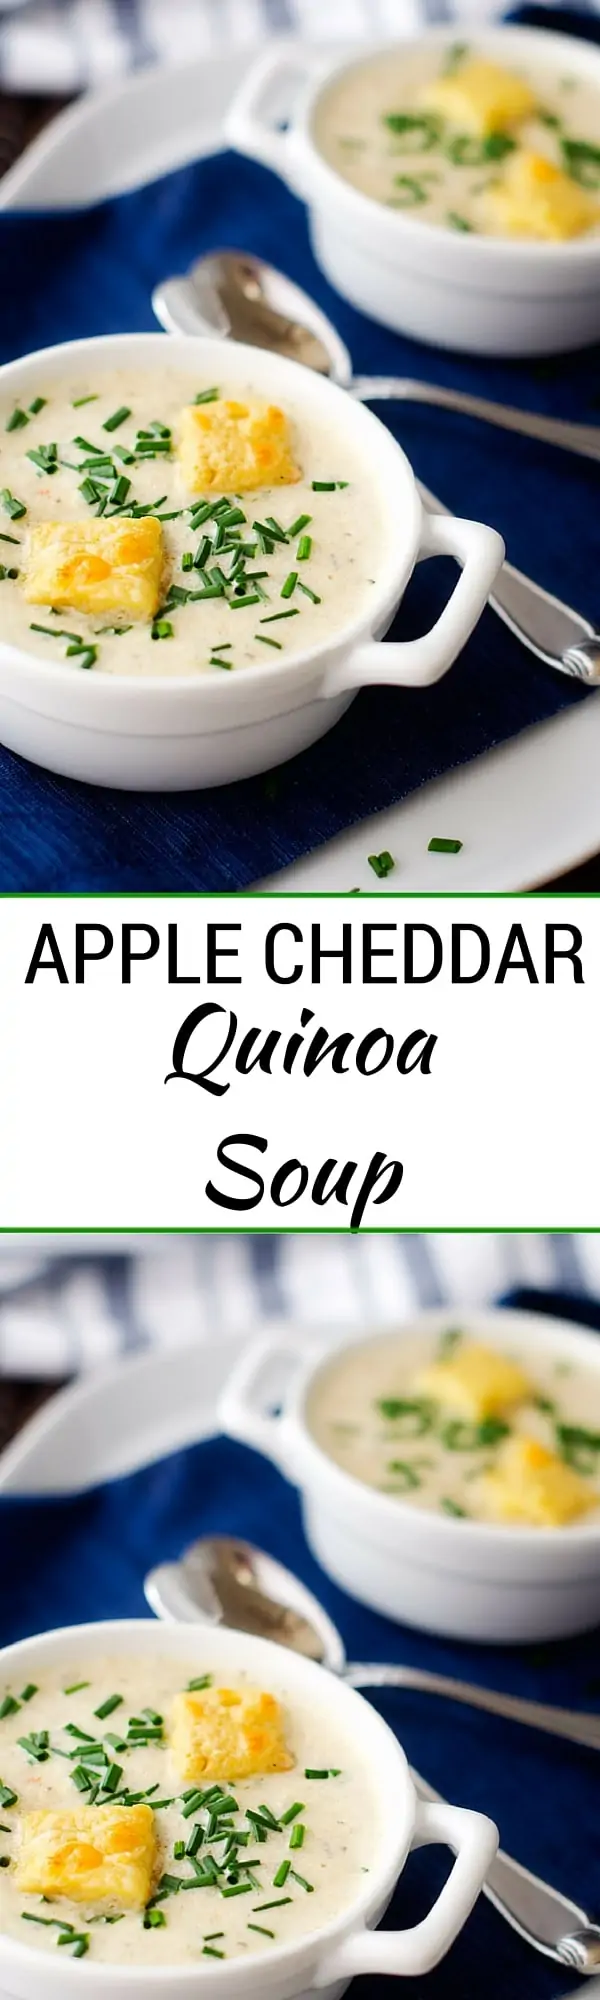 Quinoa Apple Cheddar Soup - This gluten free soup recipe is easy to make and the perfect solution to shake up your healthy meal plan. 